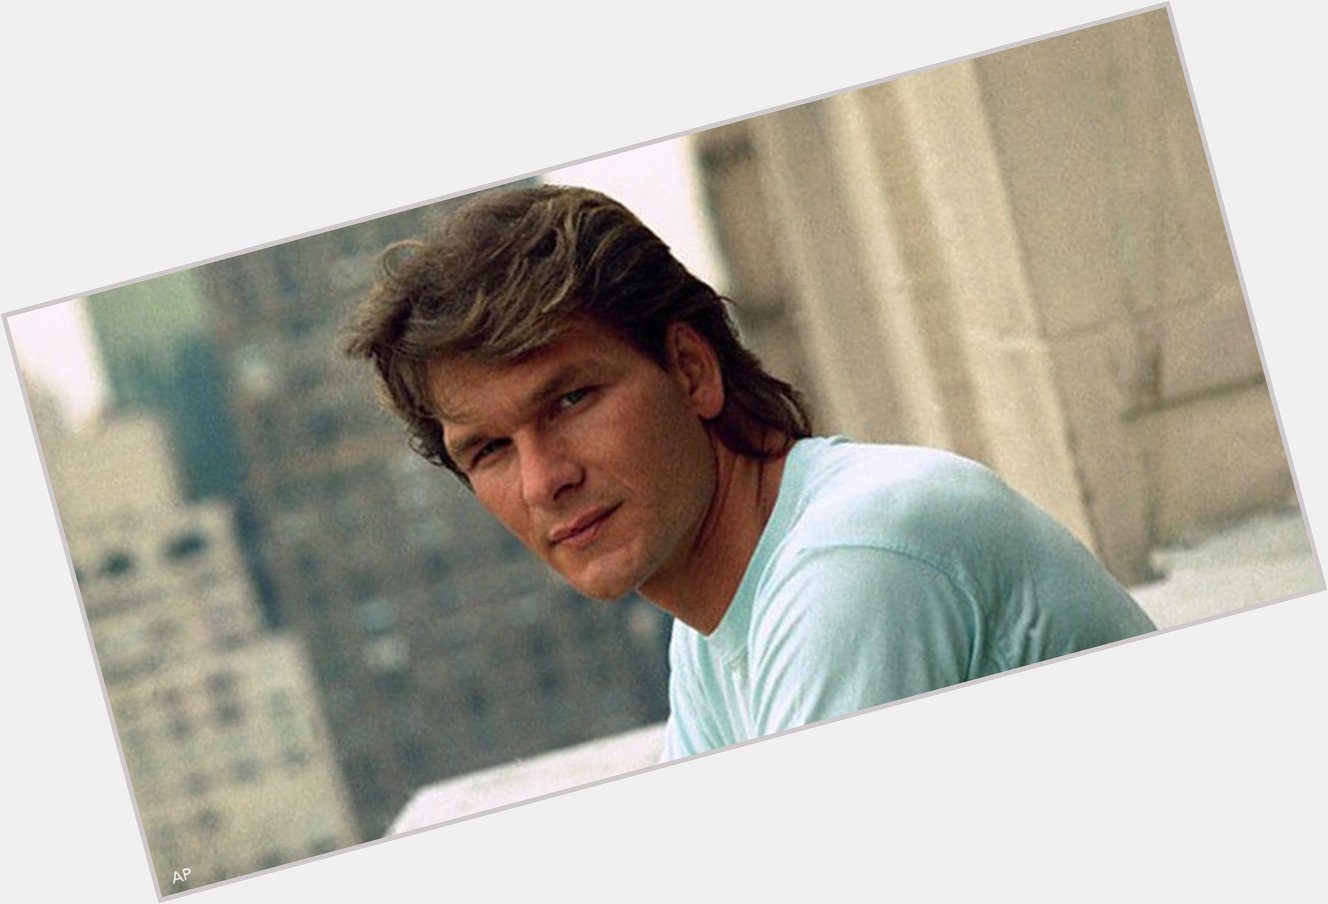 Happy Birthday to Patrick Swayze, the legendary actor/dancer would have turned 63 today. 